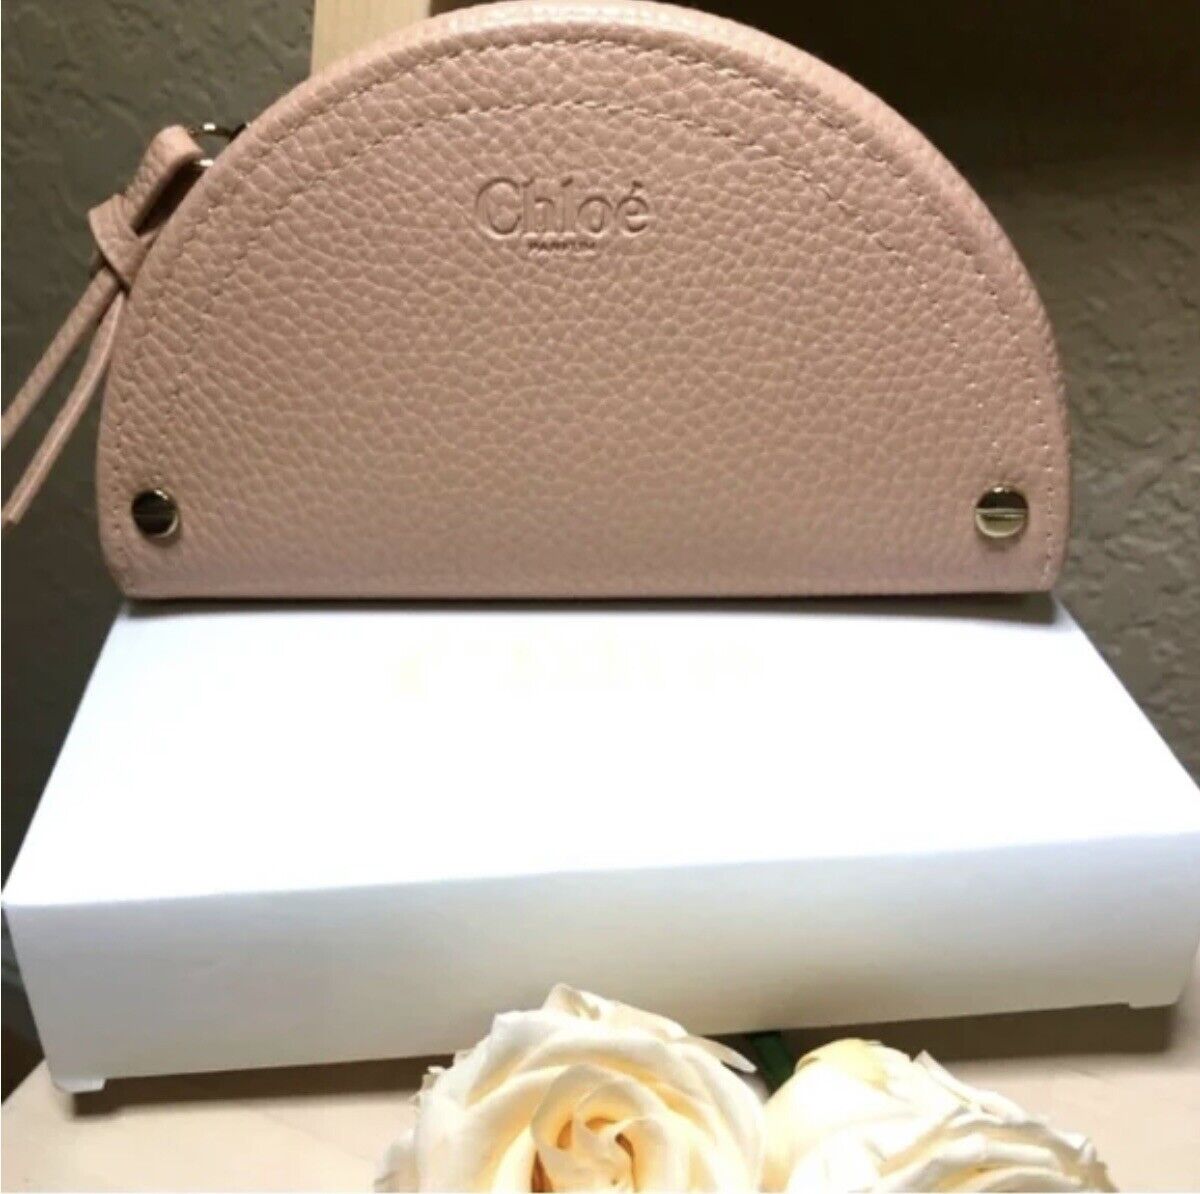 Chloe Small Oval Clutch Pouch Pochette Cosmetic Bag In The Box